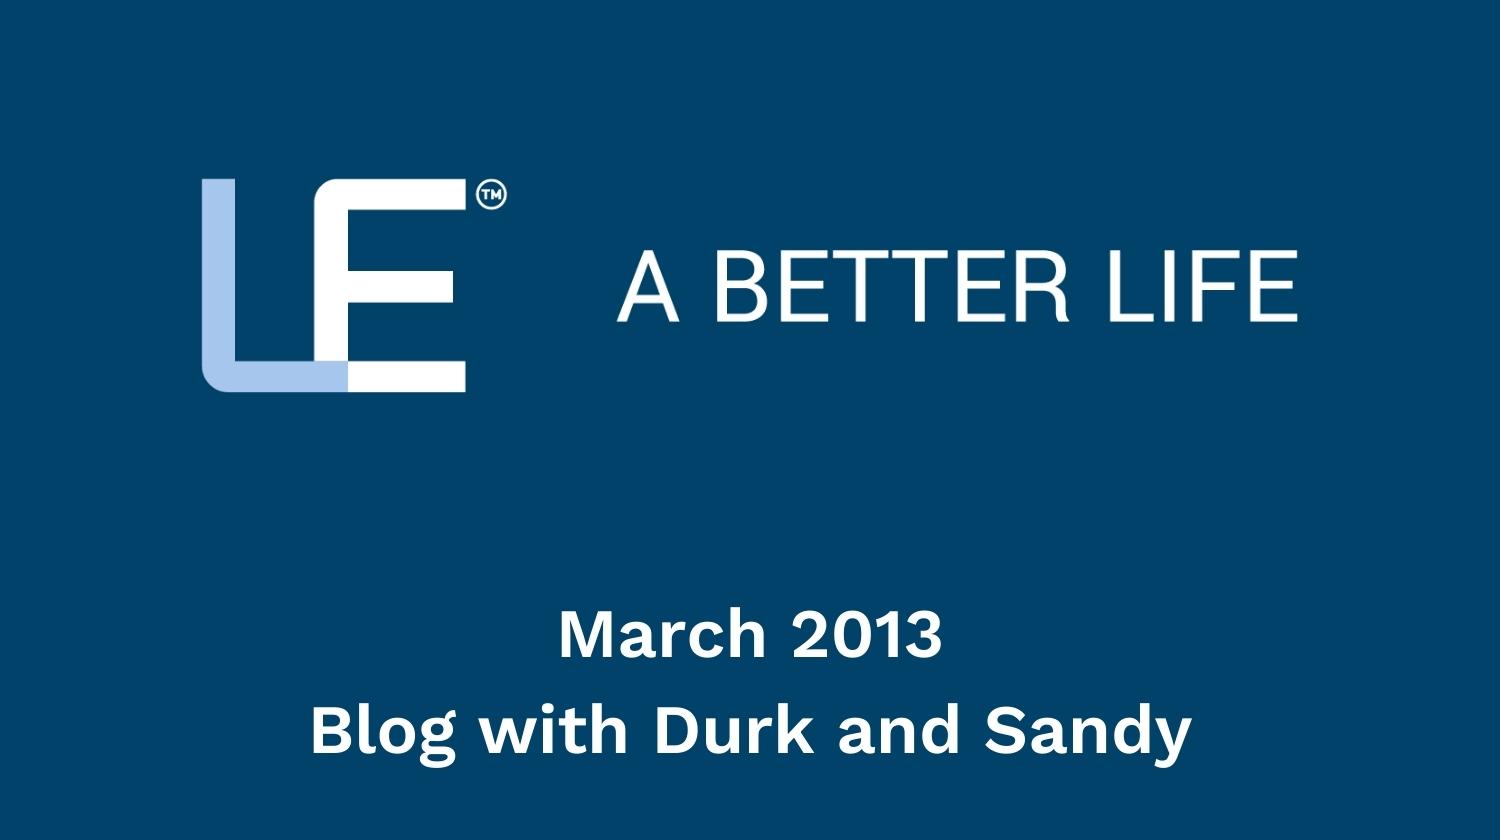 March 2013 Blog with Durk and Sandy